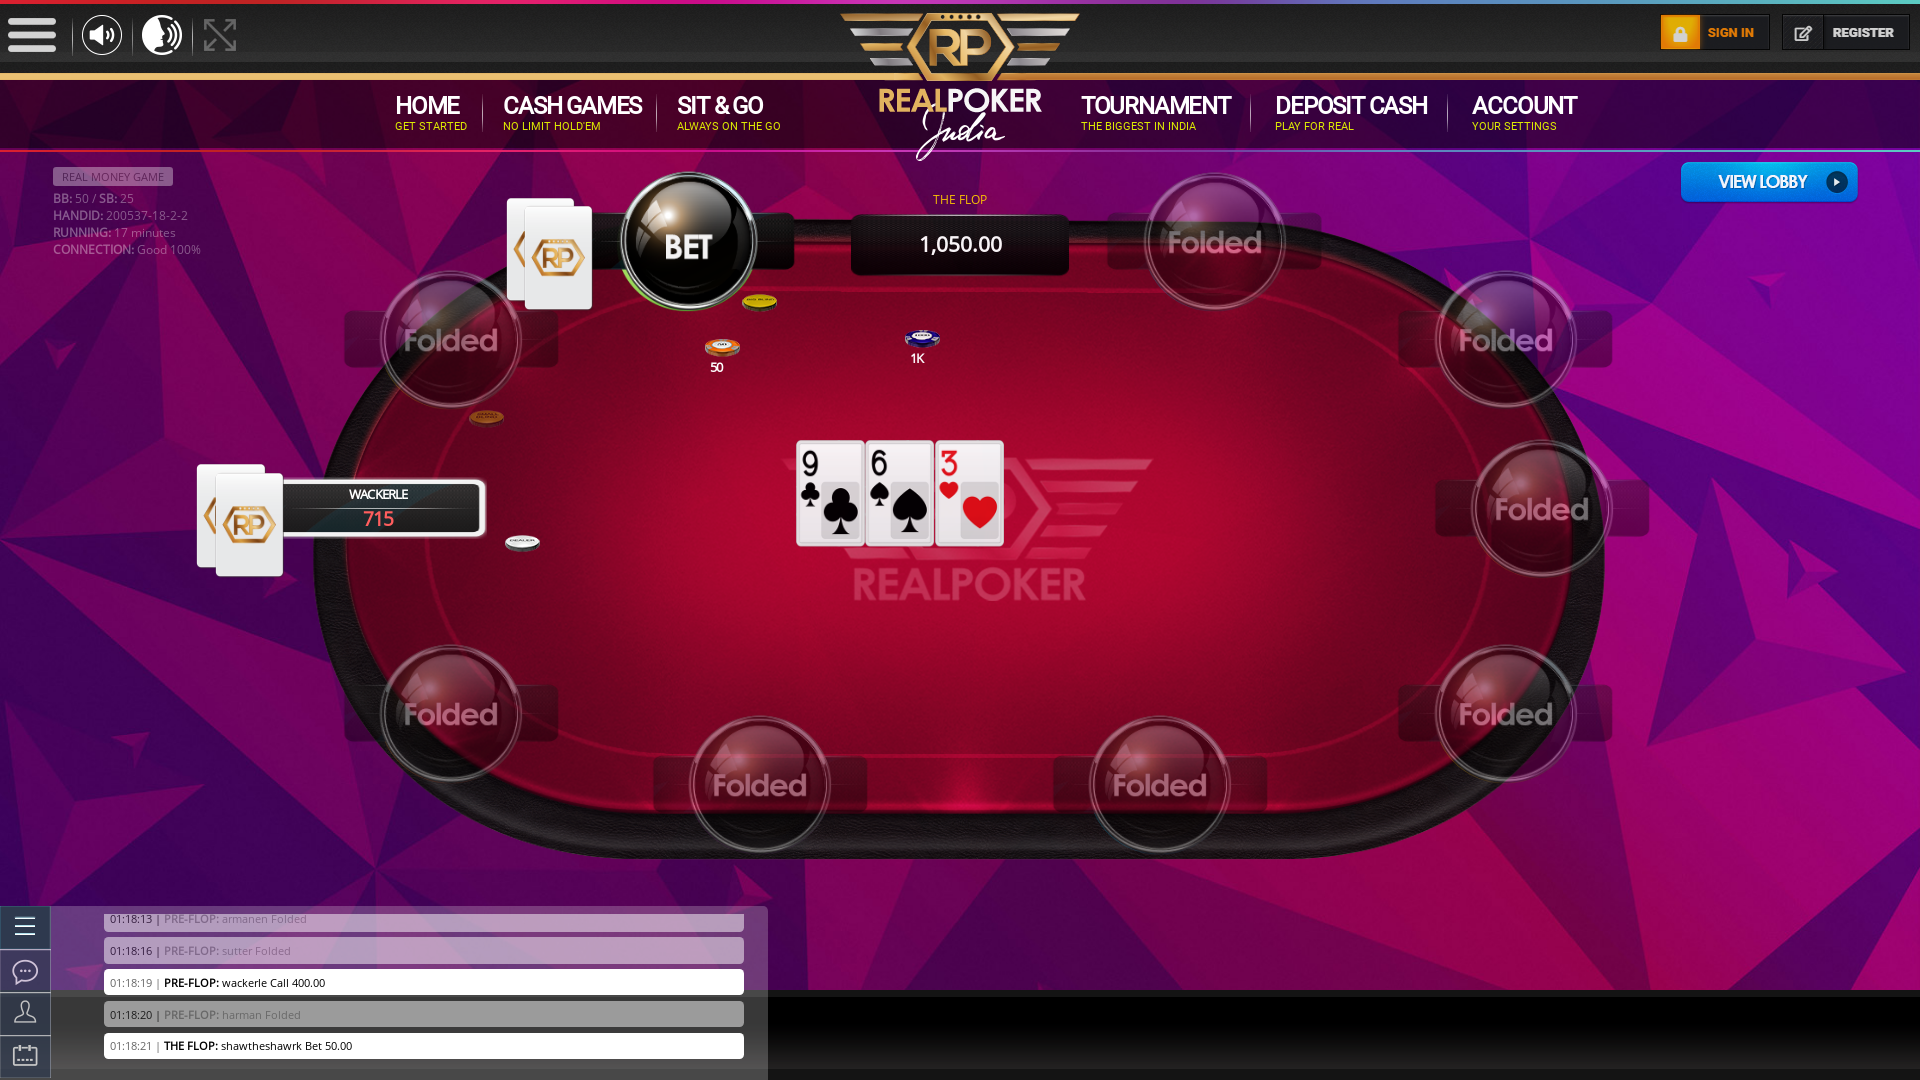 Online poker on a 10 player table in the 16th minute match up